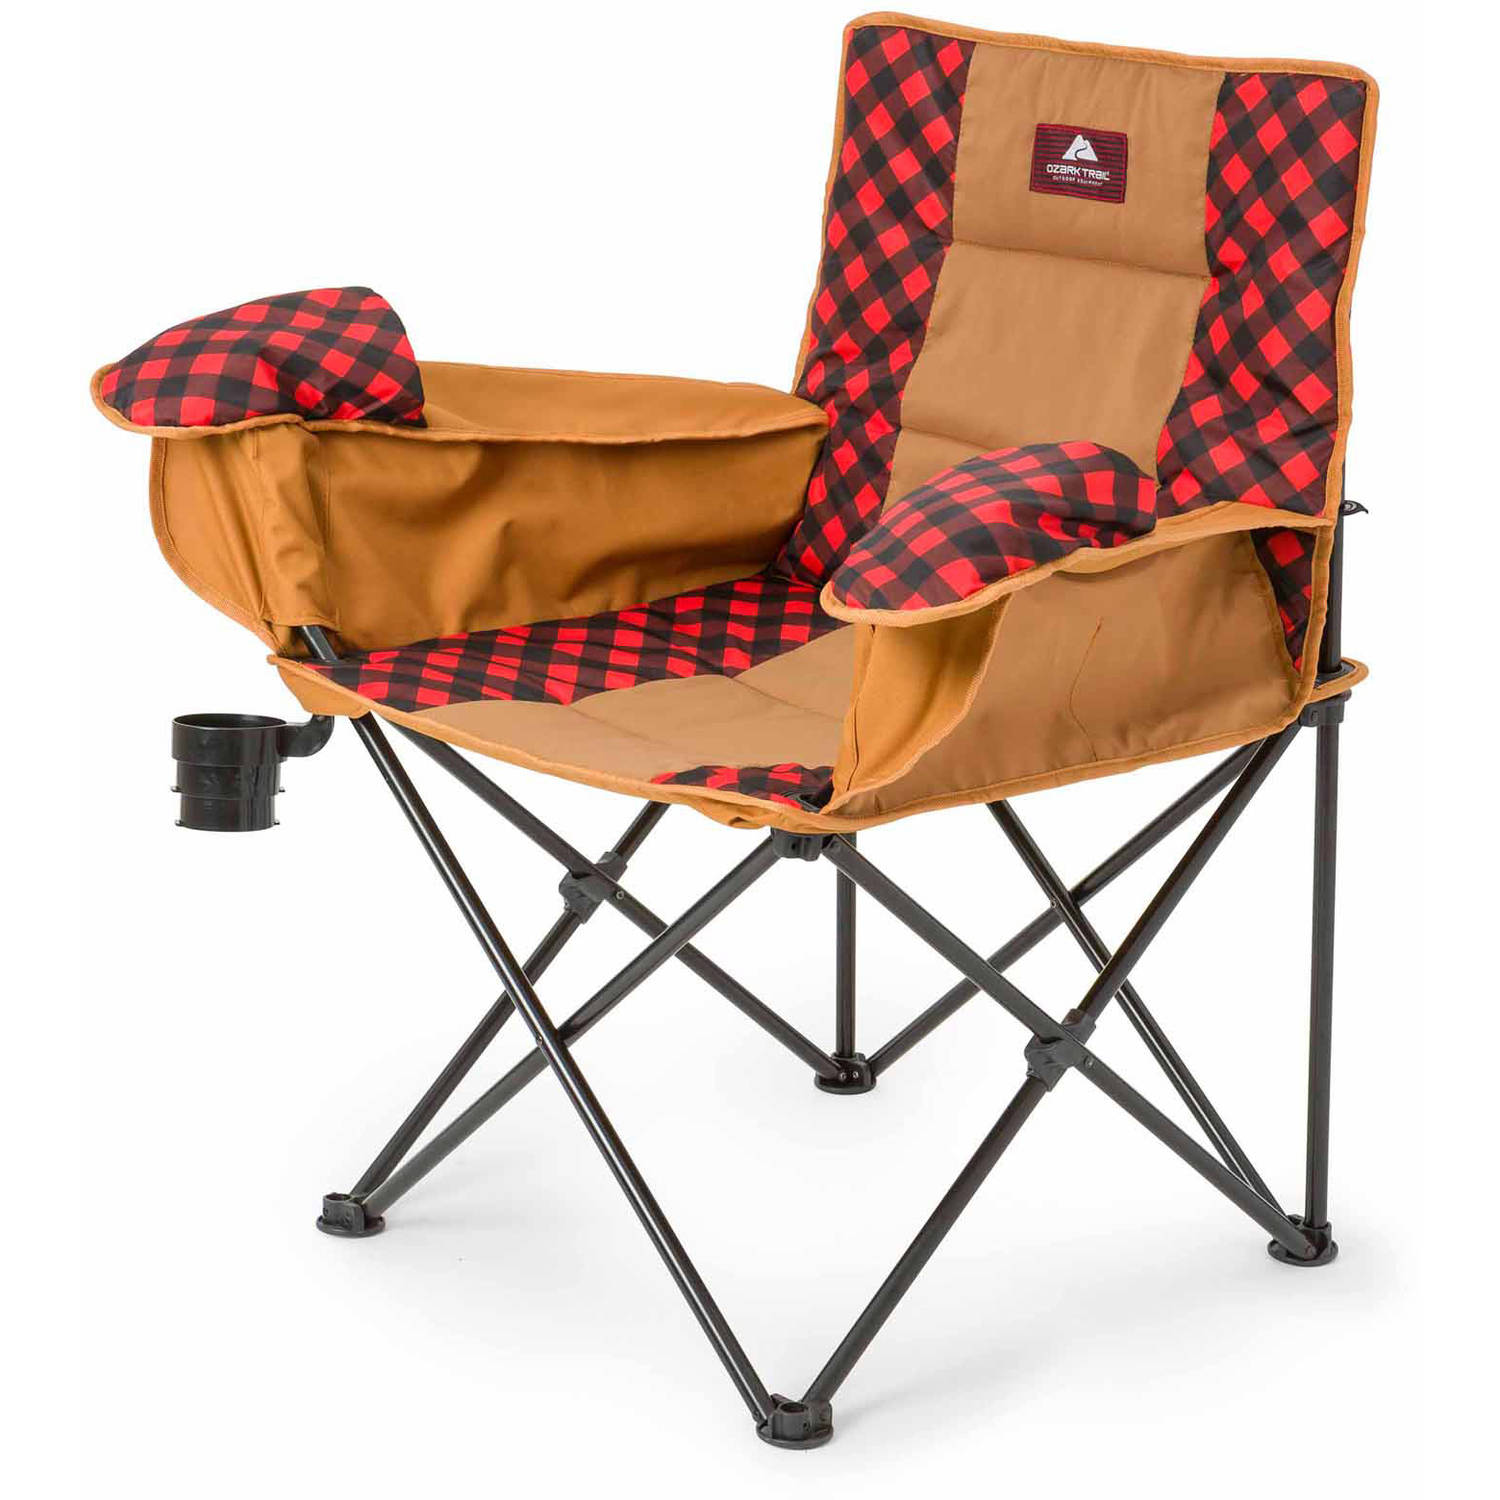 Ozark Trail Chair - image 1 of 5